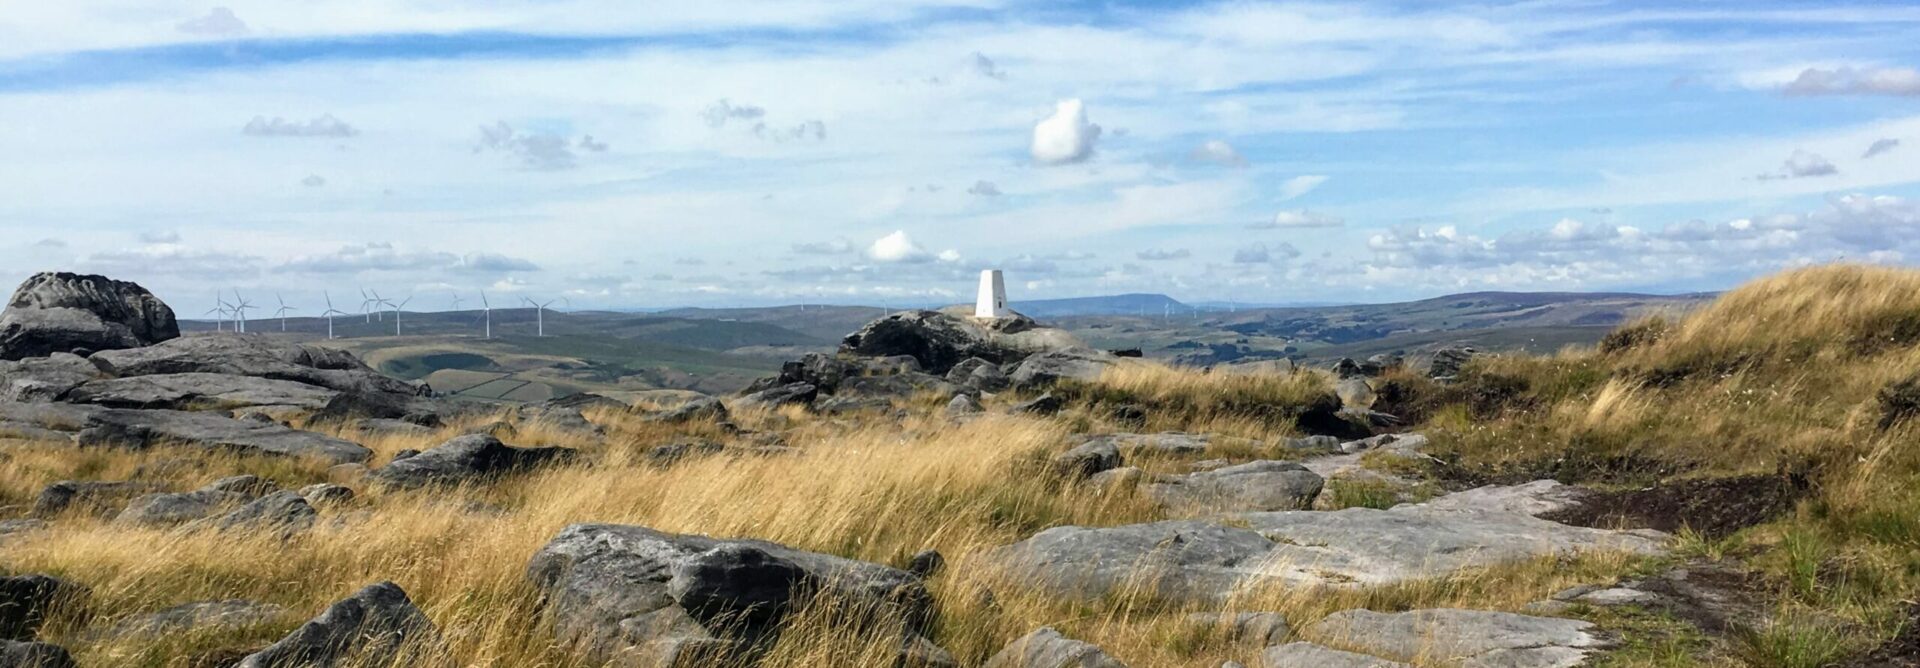 View of the trig point on Blackstone Edge